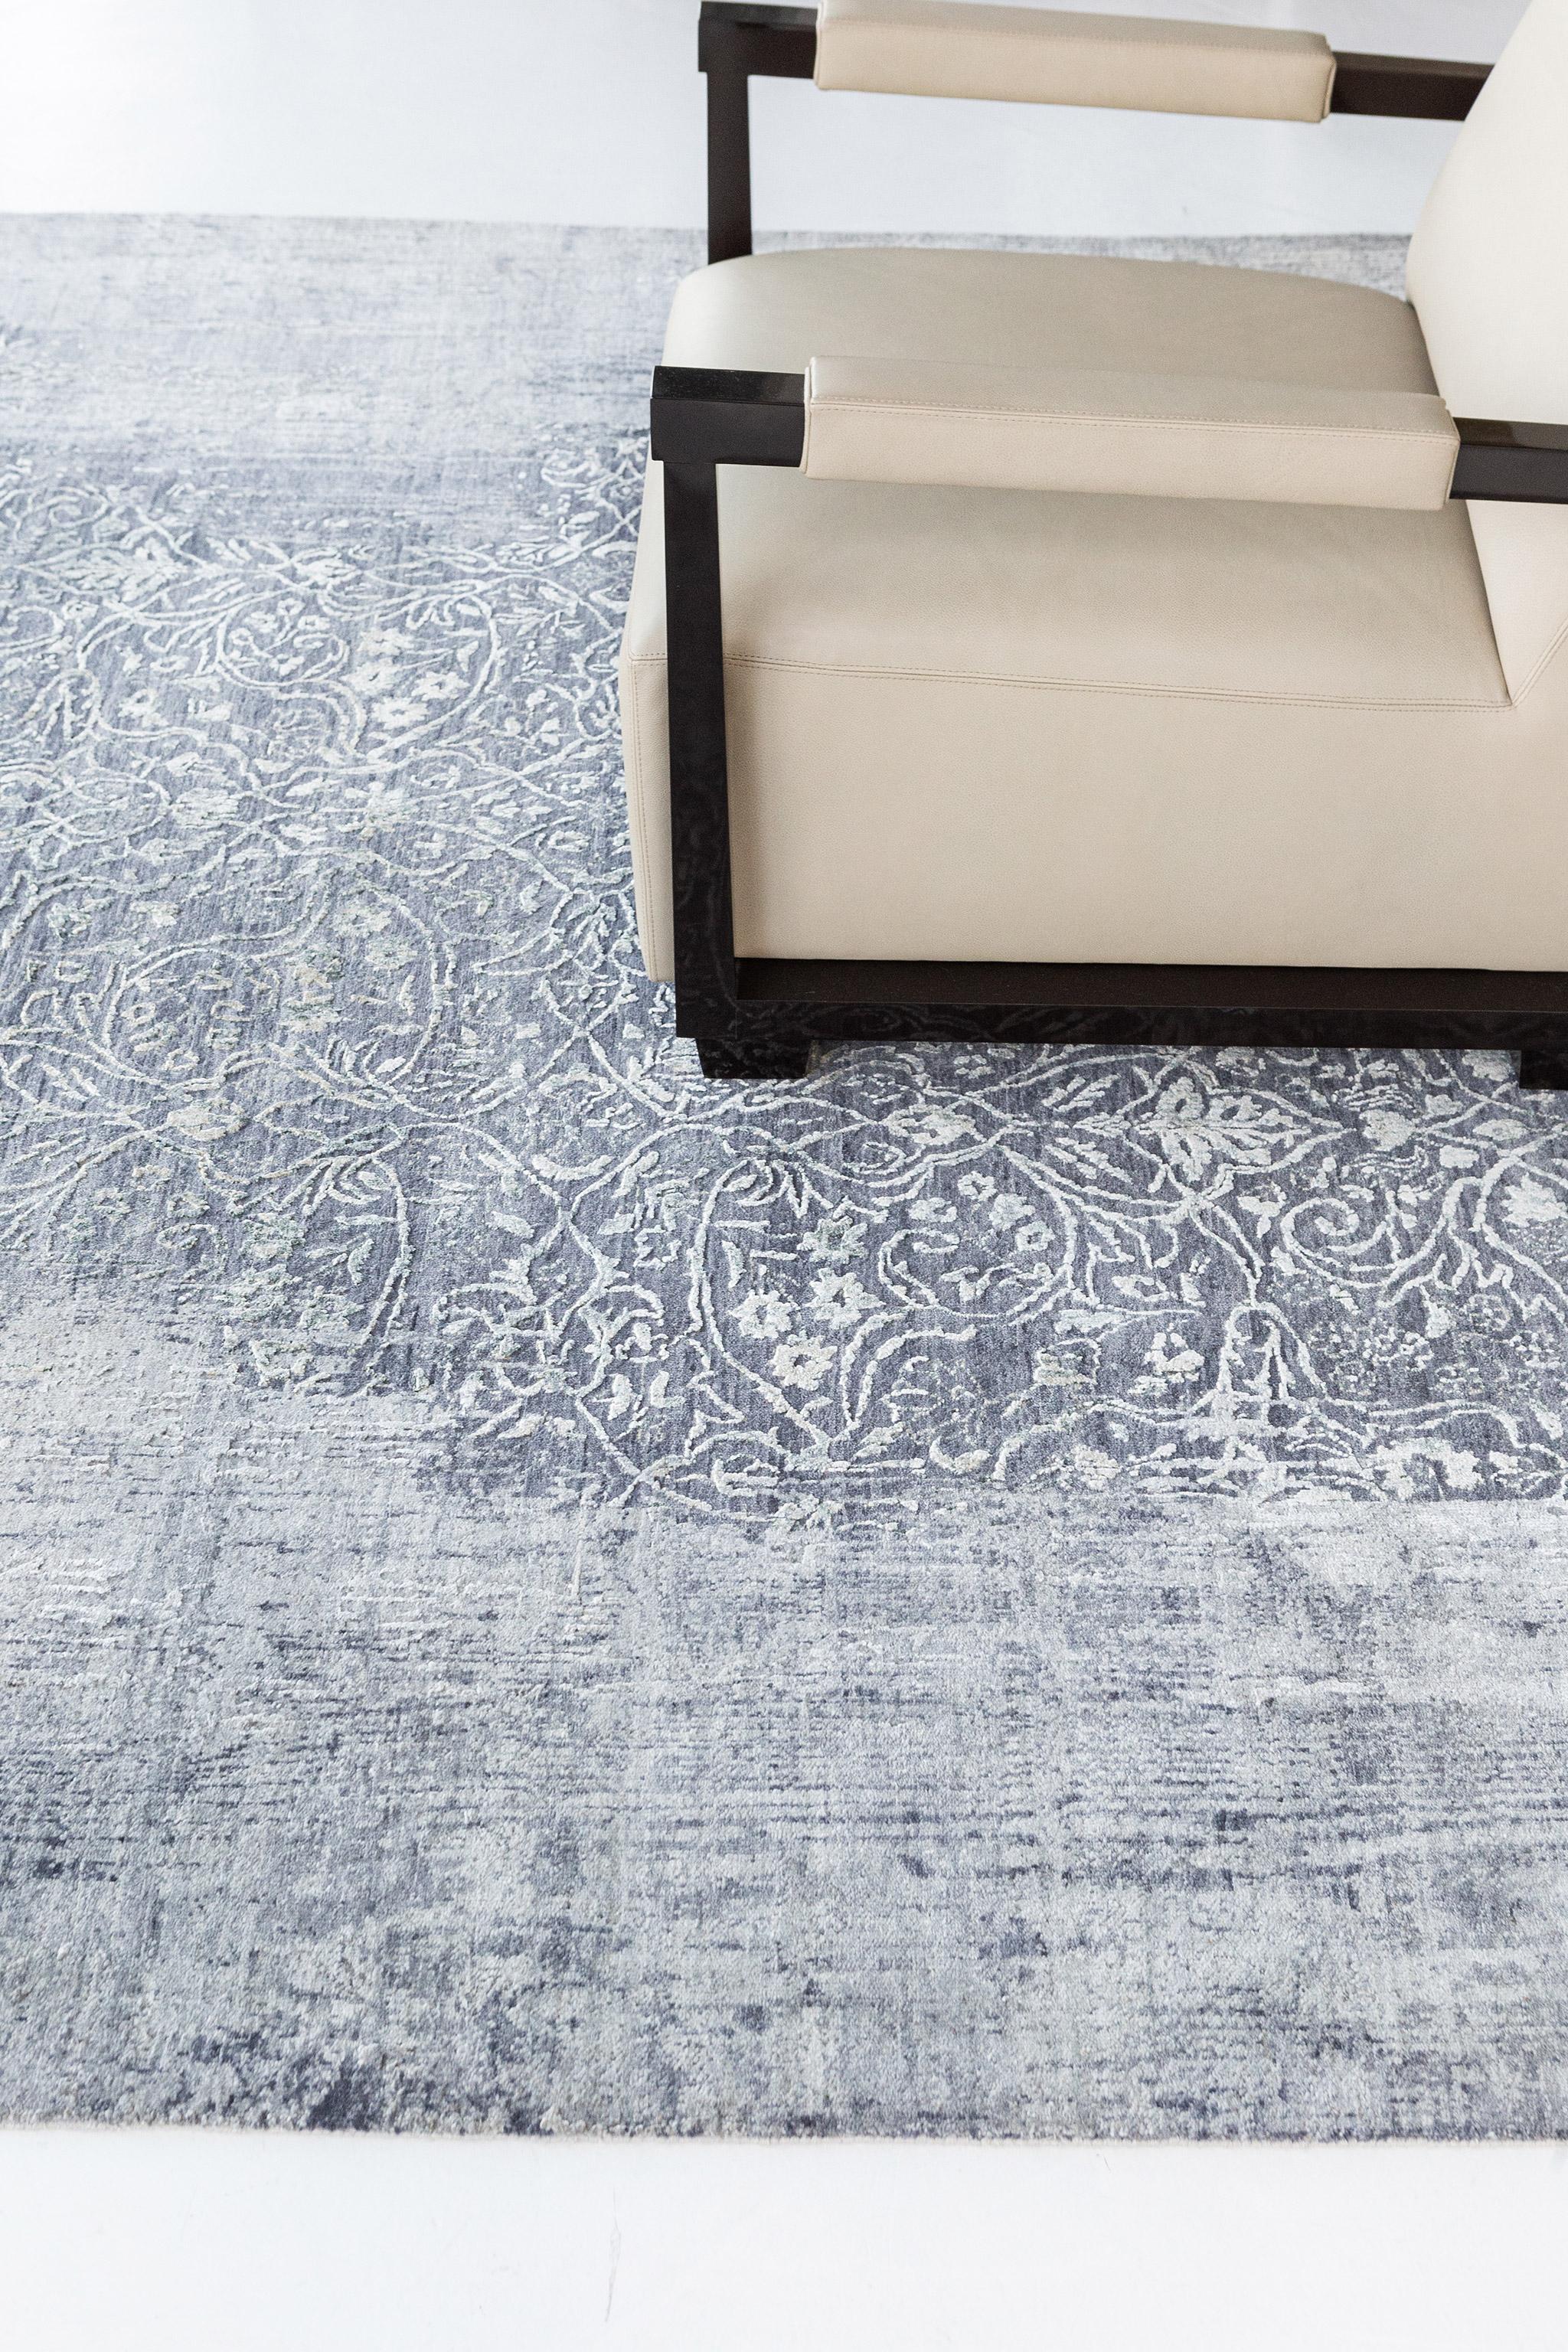 A sophisticated Transitional Design rug that is impeccably woven with various botanical elements in the soothing muted combinations of yale blue and cream accent. This refined rug charms with ease and beautifully embodies transitional dainty style.